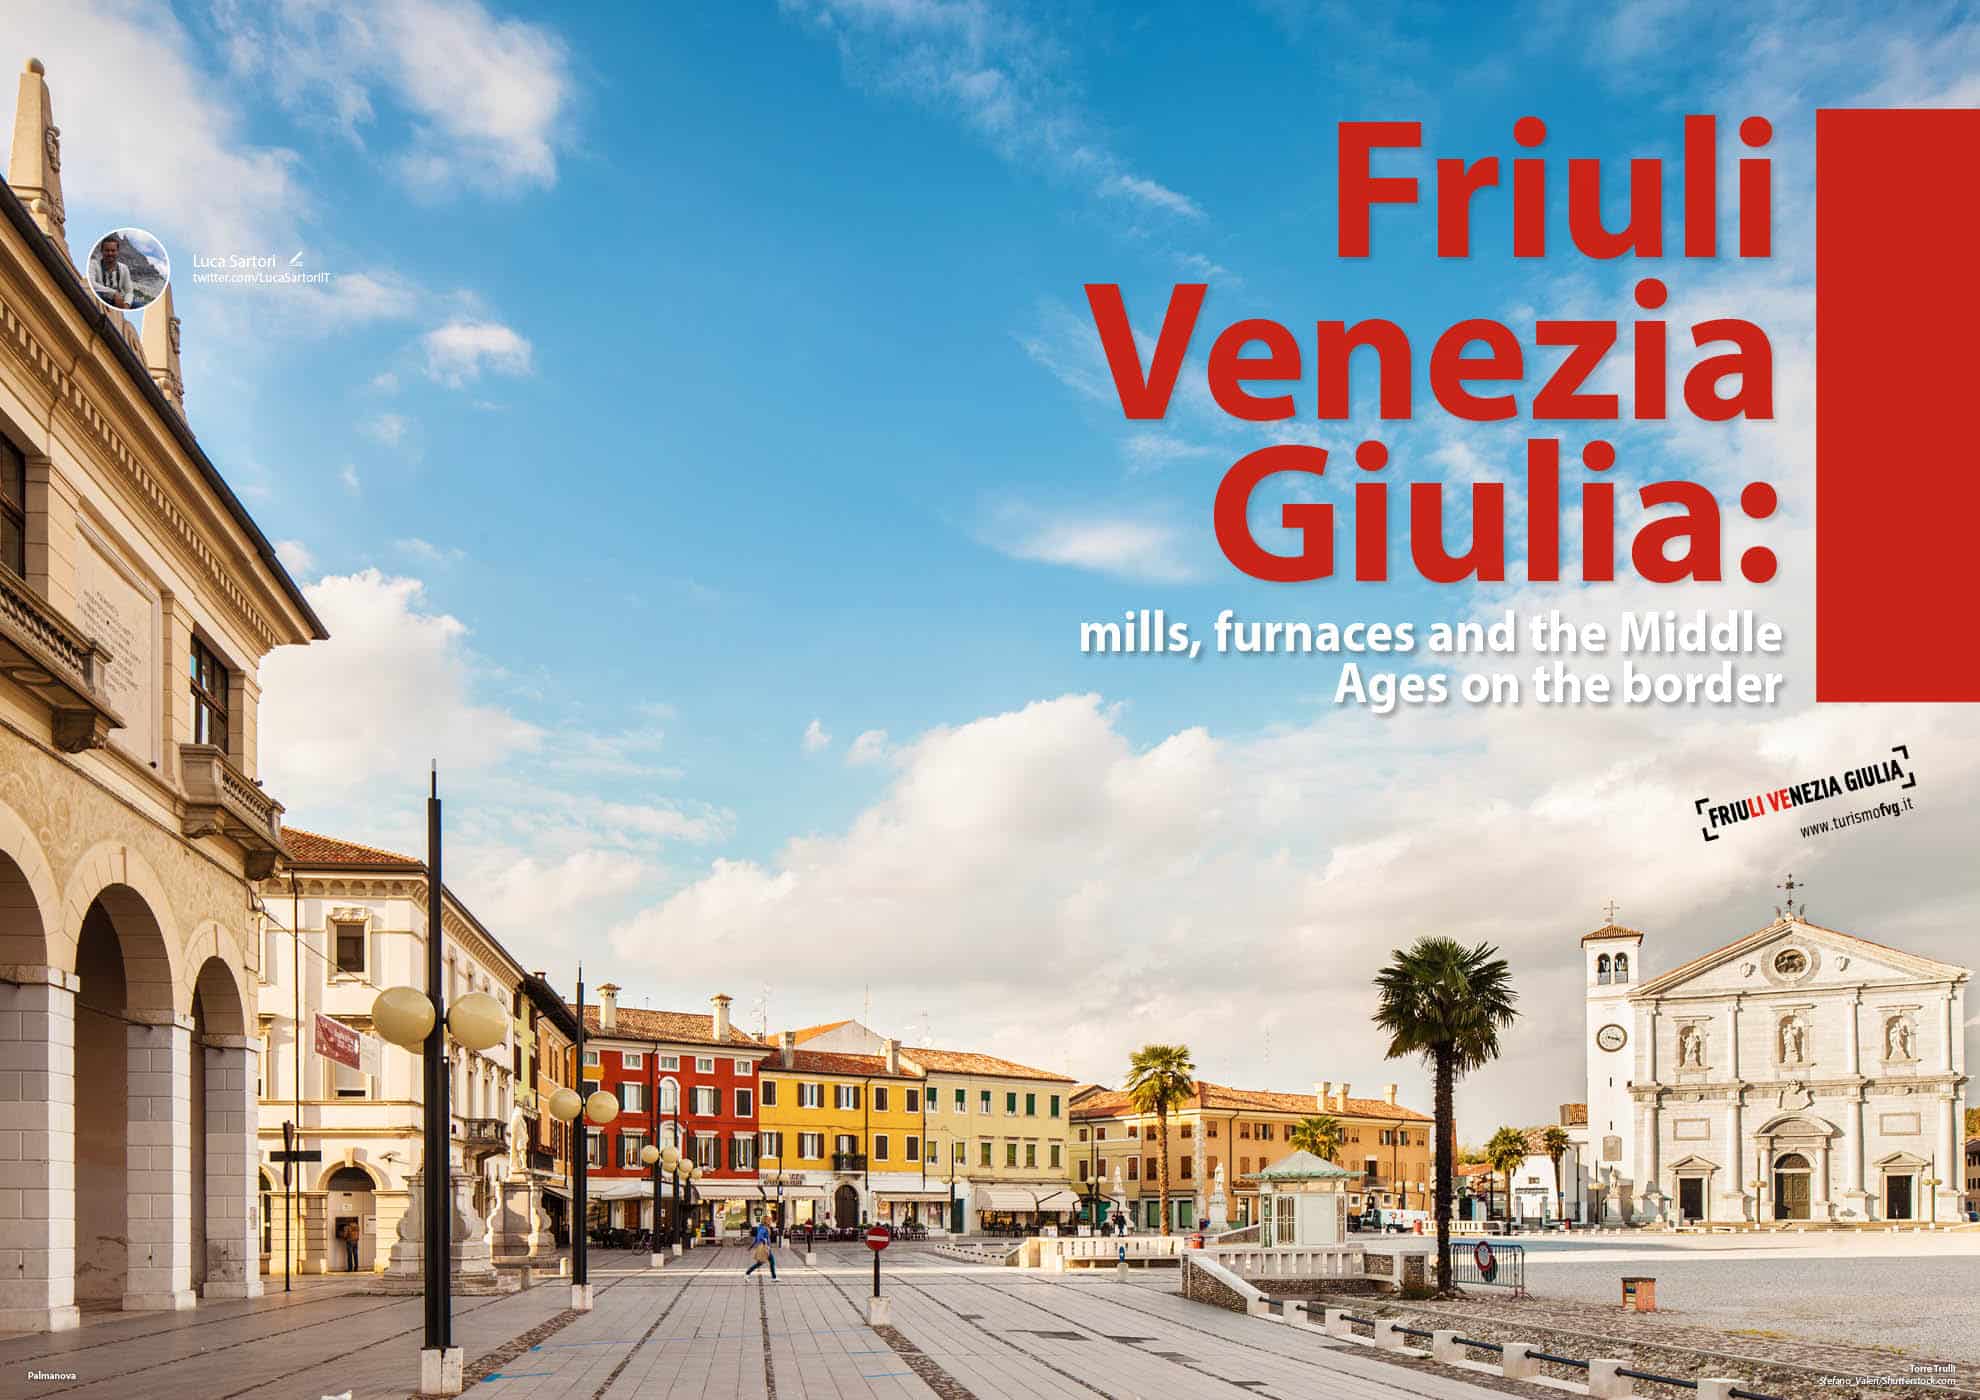 e-borghi travel 5: Landscapes and villages - Friuli-Venezia Giulia: mills, furnaces and the Middle Ages on the border